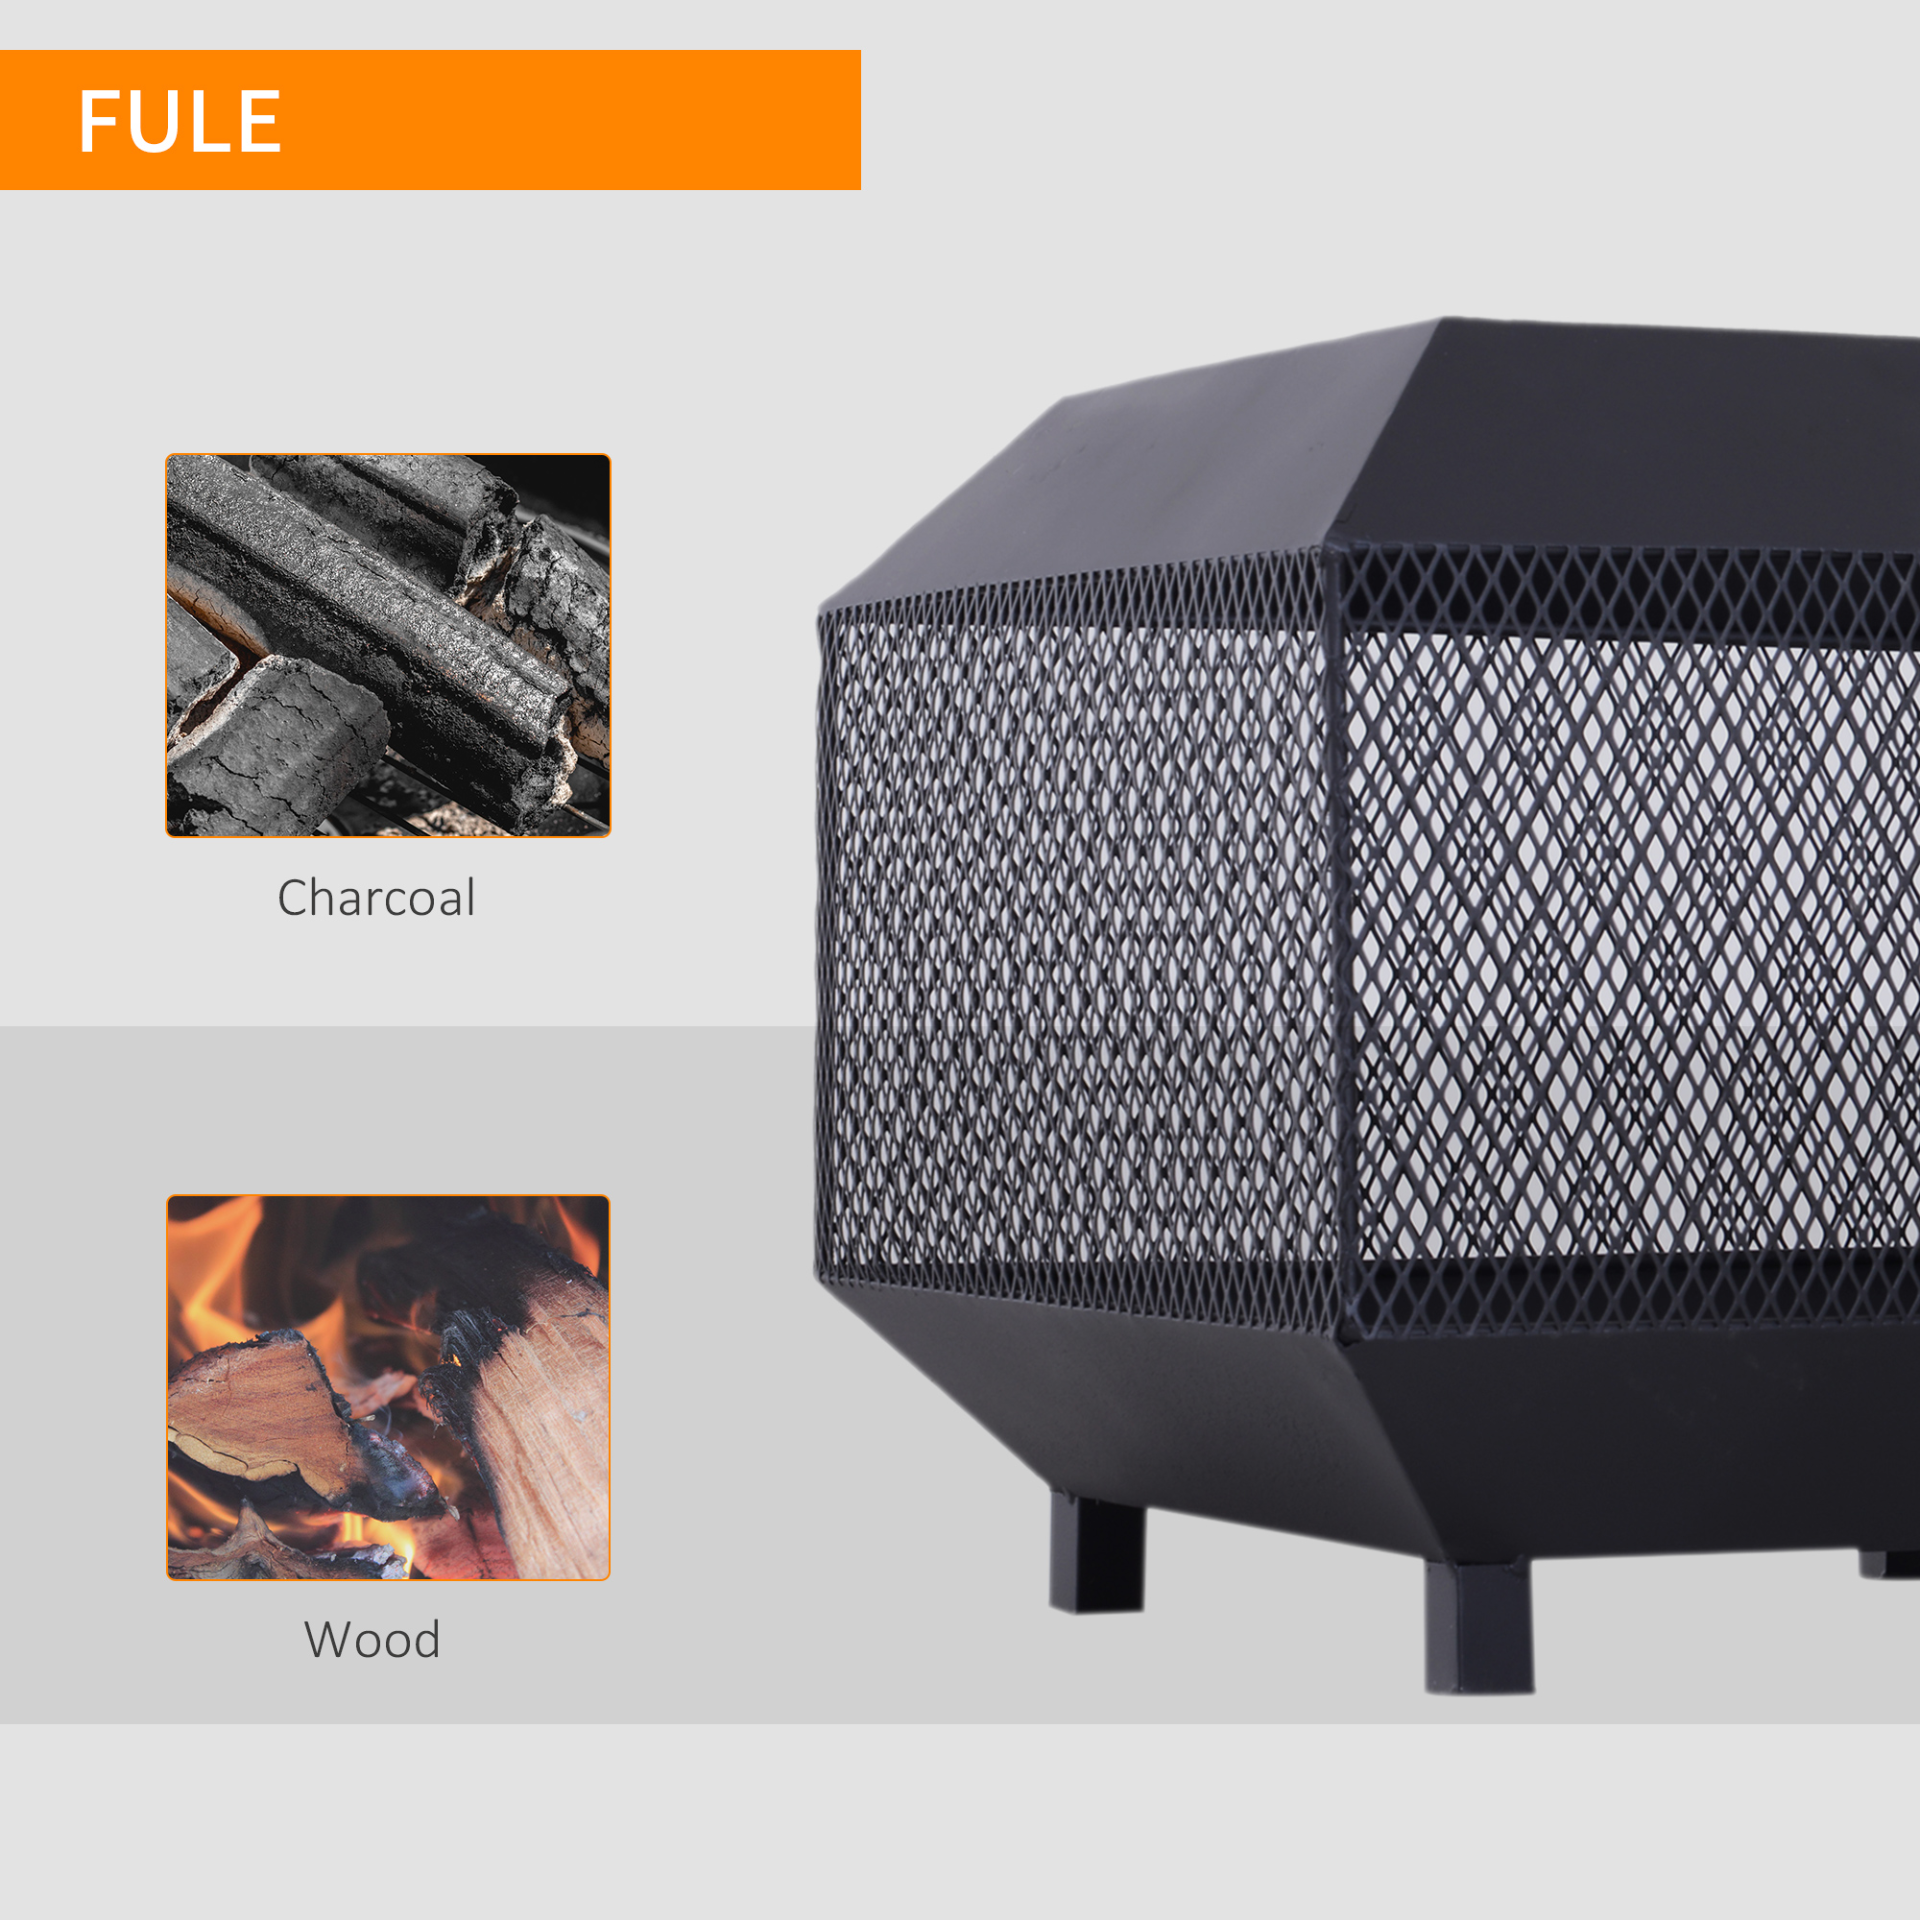 Outsunny Metal Square Fire Pit Outdoor Mesh Firepit Brazier w/ Lid, Log Grate, Poker - Black Firepit Cosy Camping Co.   